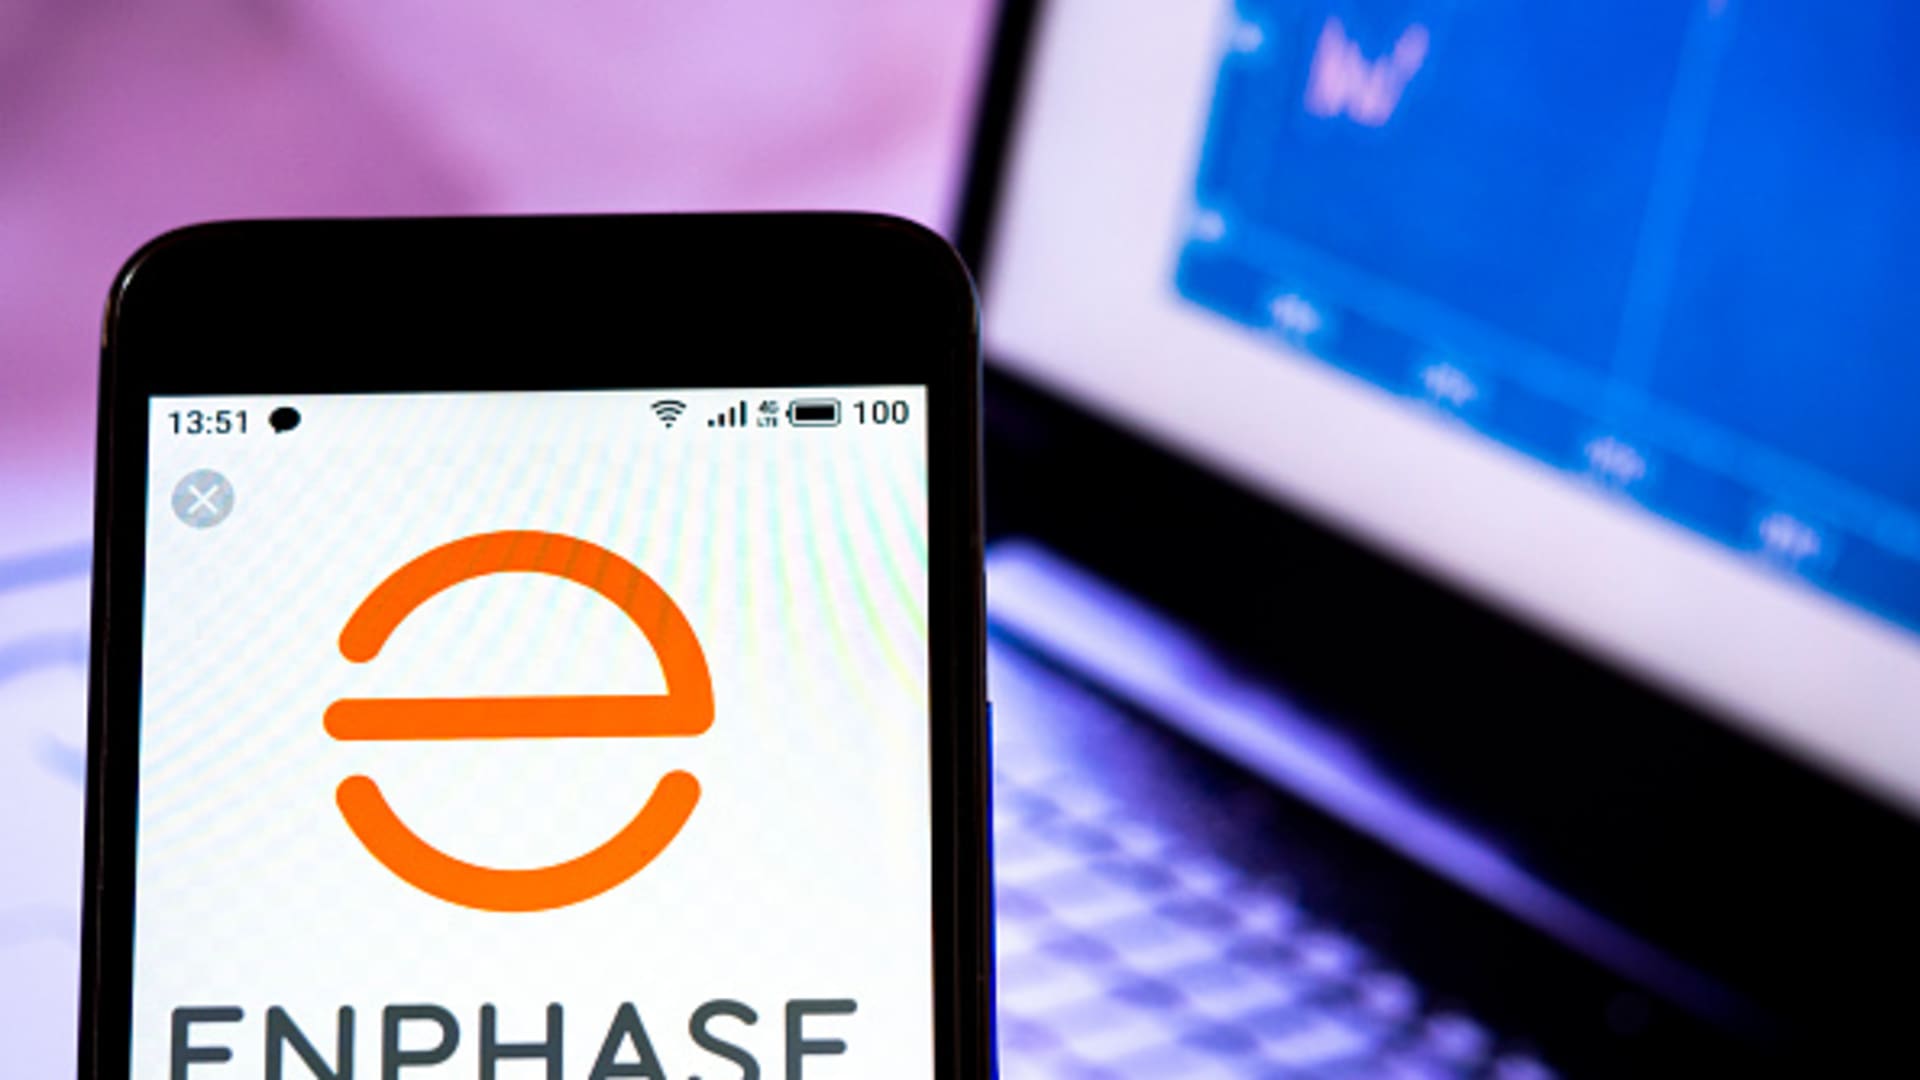 Enphase Energy will lay off roughly 10% of workforce as part of restructuring plan